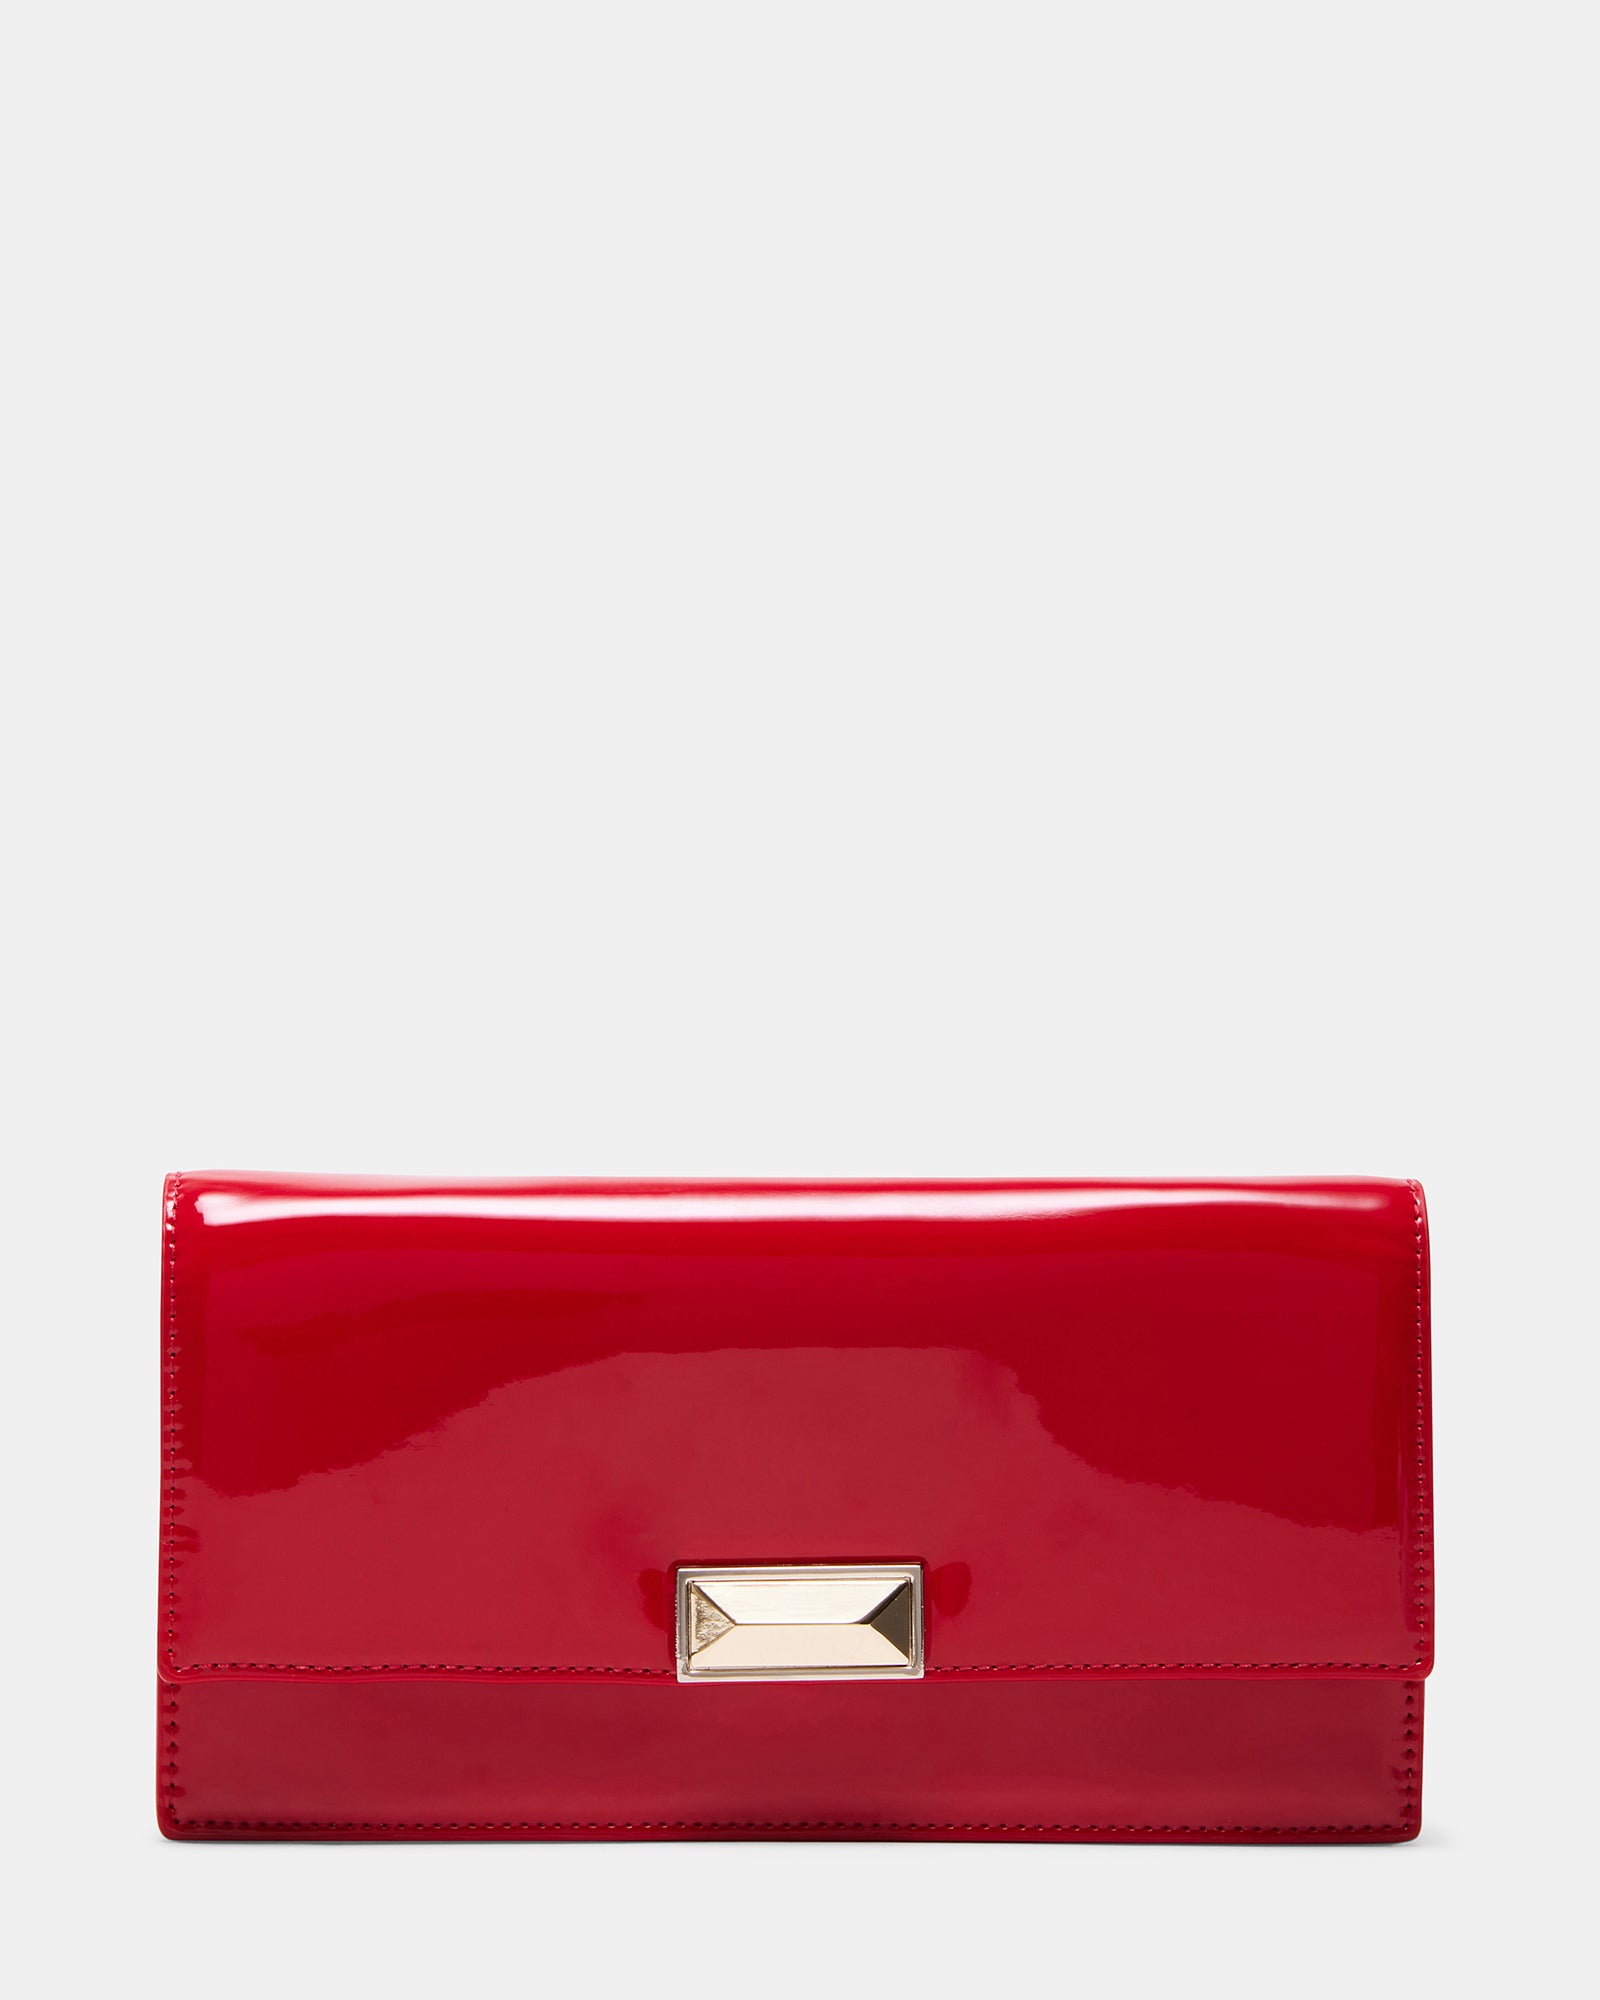 Khaite The Lilith Evening Bag In Scarlet Suede - Red | Editorialist